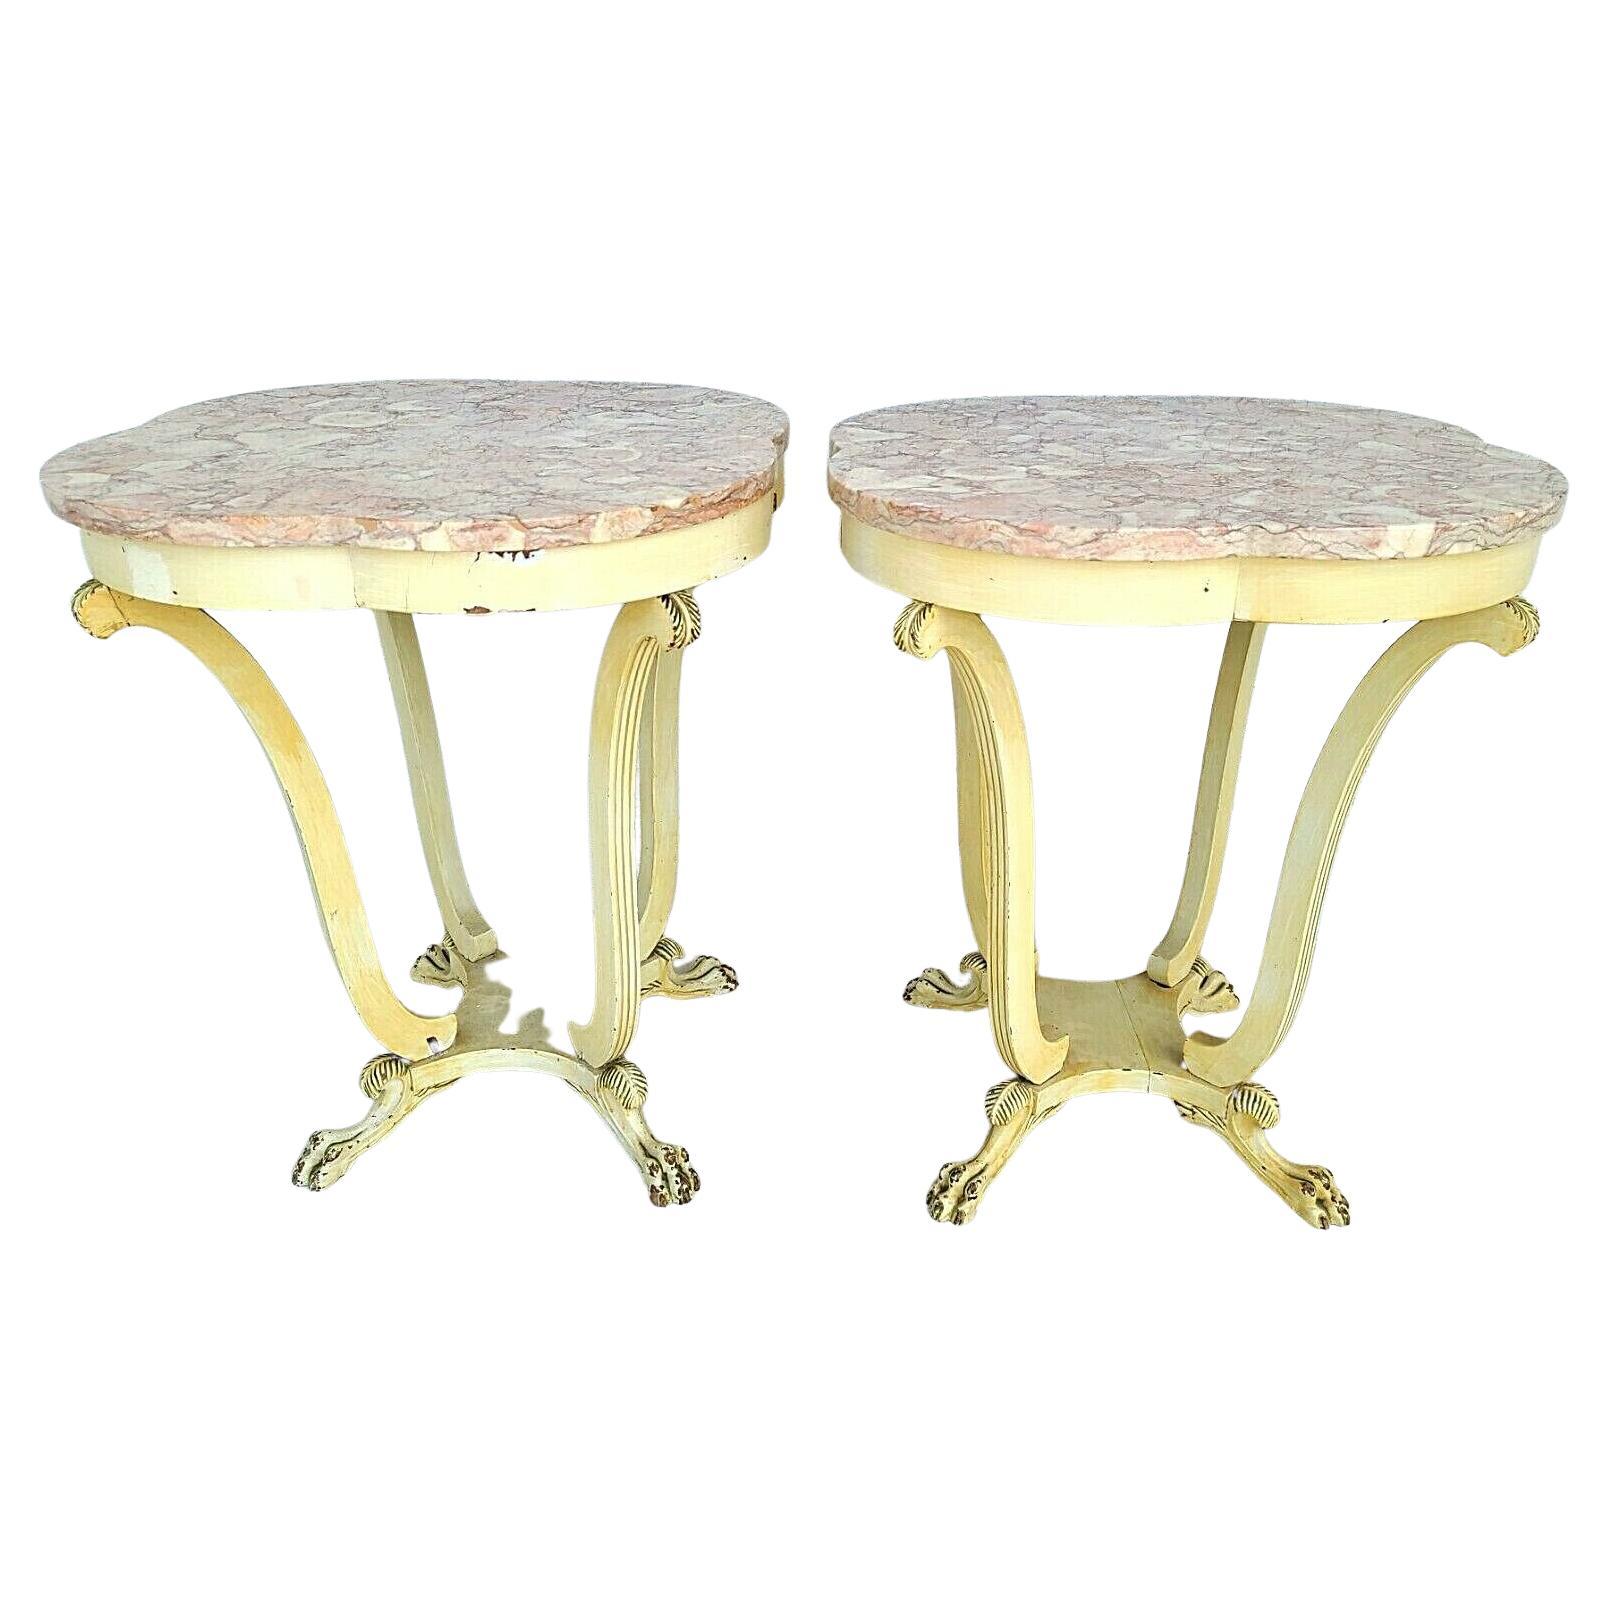 Antique Louis XV Style Claw Footed Marble Side Tables Nightstands, A Pair For Sale